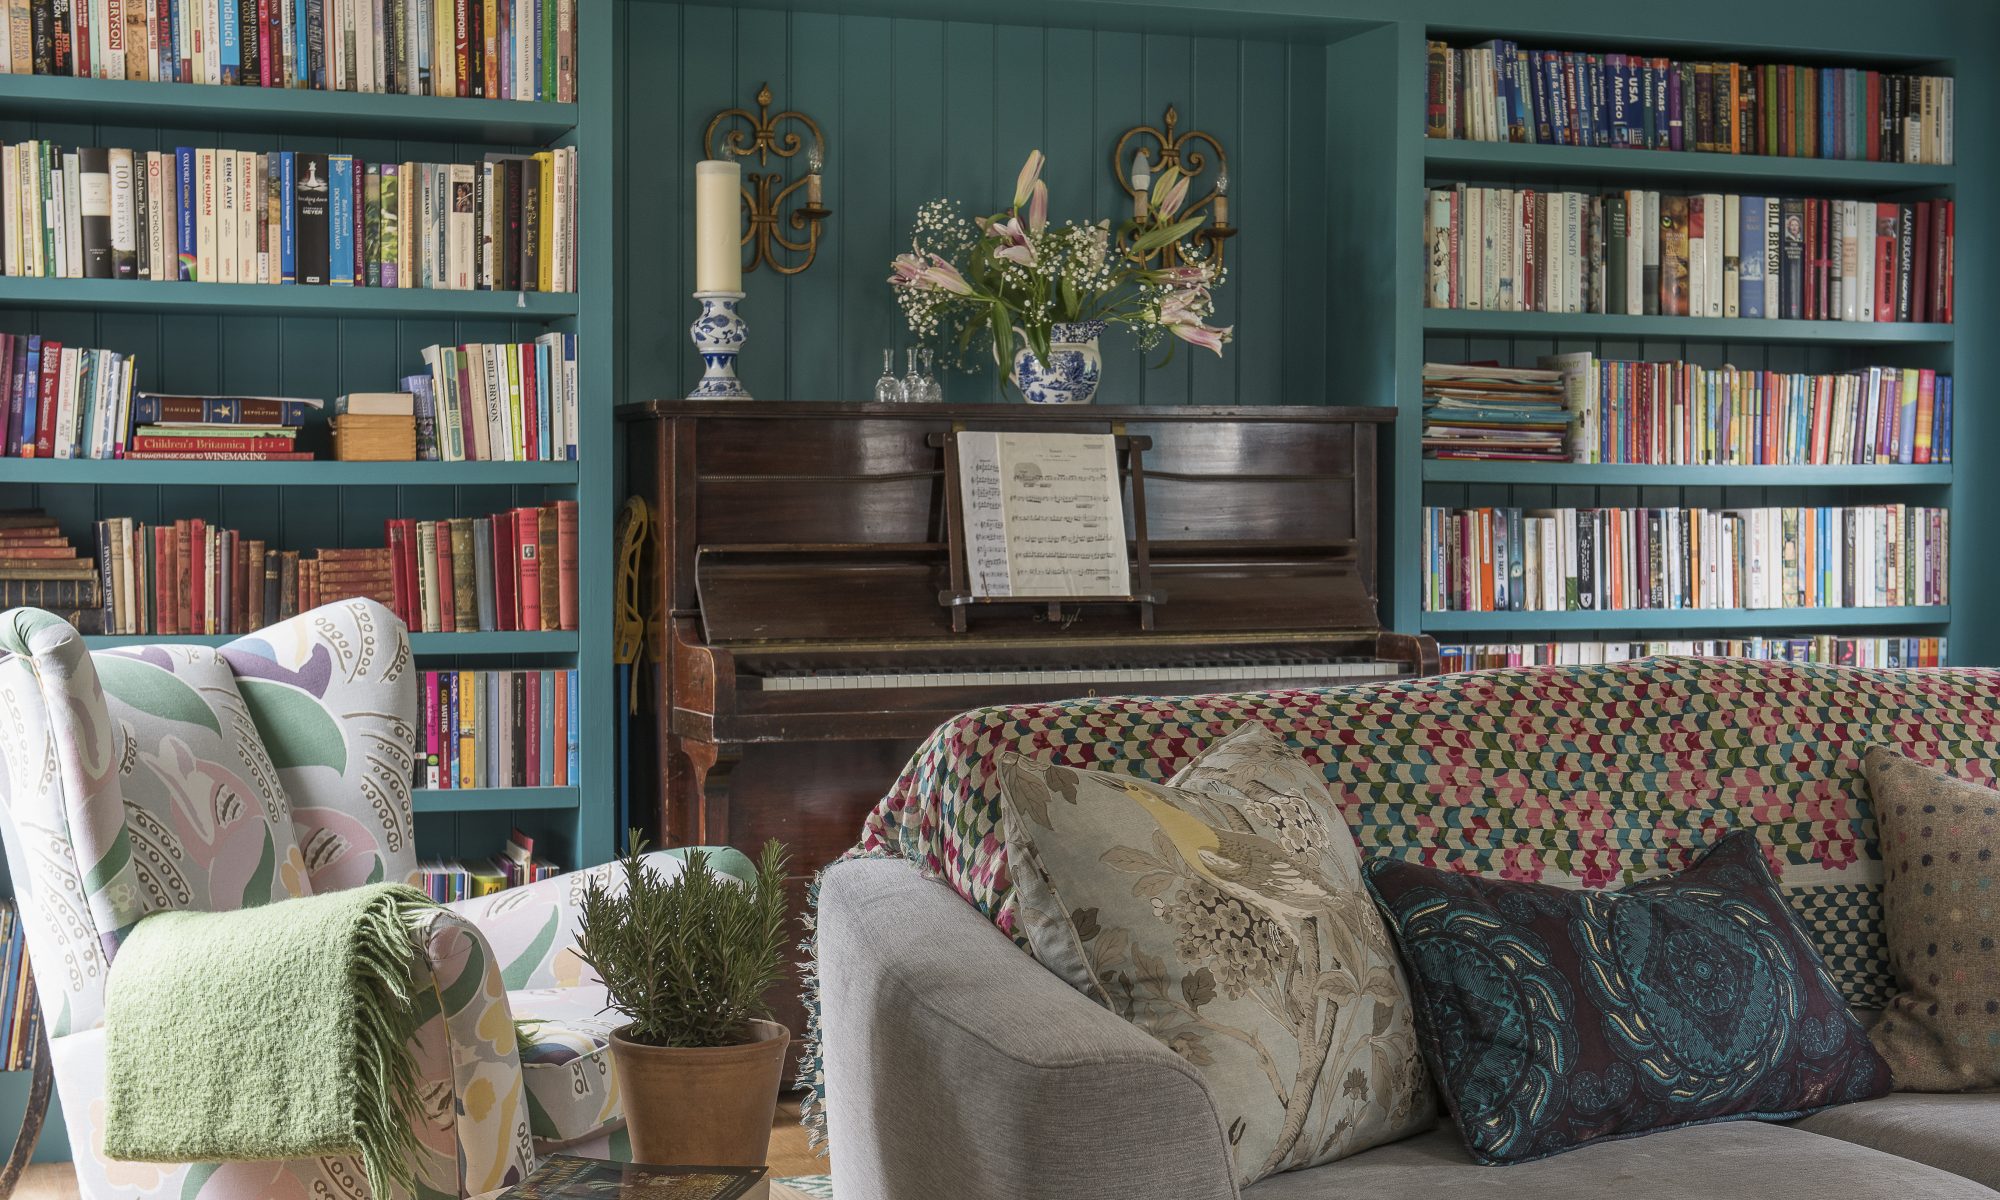 Ally commissioned bespoke bookshelves to create a focal point in the sitting room. The walls are painted in Farrow & Ball’s Varta, to add a splash of bold colour.